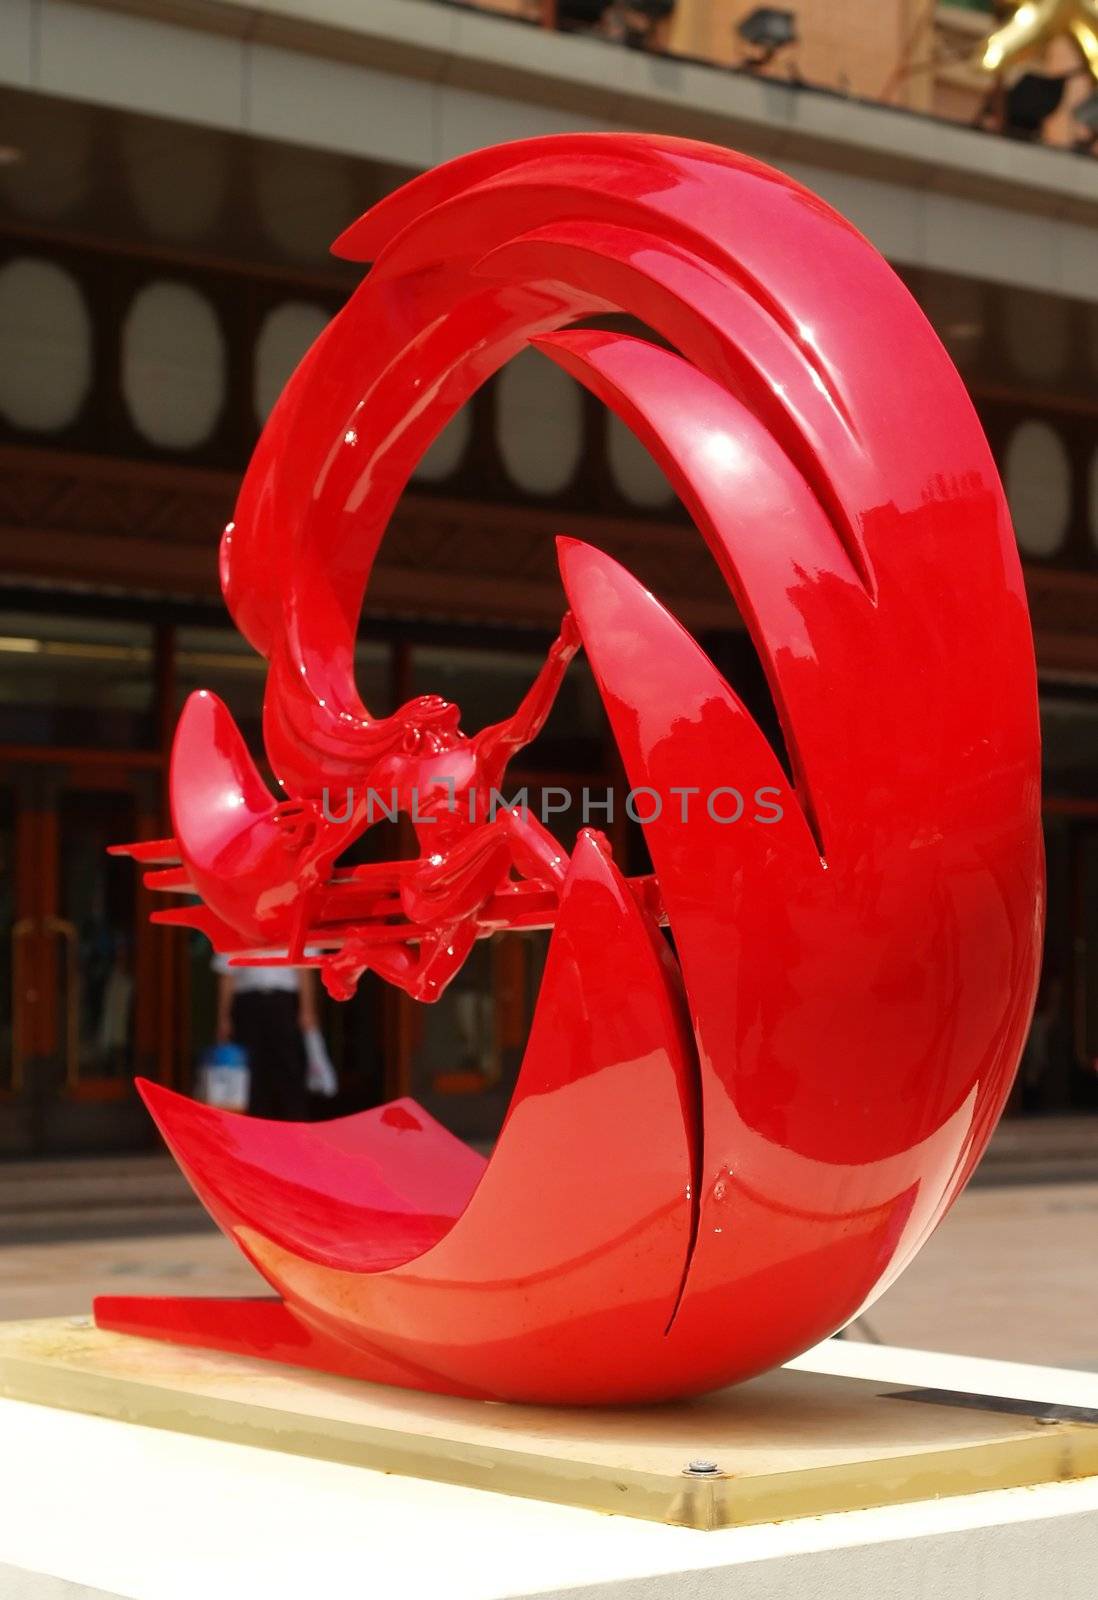 2008 Beijing summer Olympic game national artistic city sculpture competition finalists displayed for public voting in the major shopping district �Wanf-Fu-Jing� in Beijing July 2006. The winning sculptures will be built at different Olympic sites/parks around city.